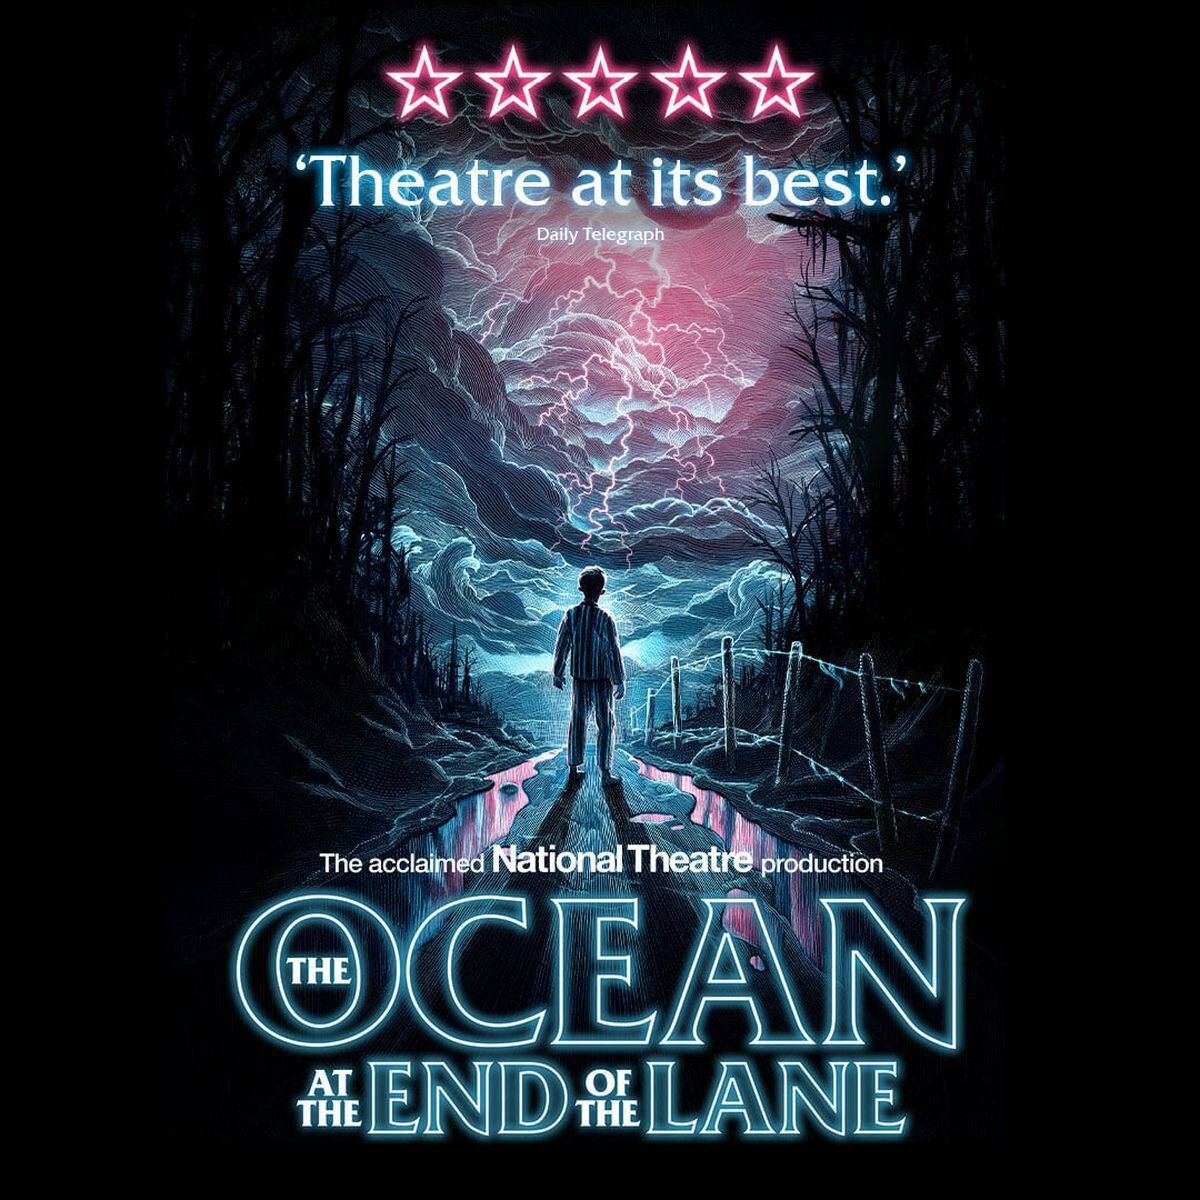 The Ocean at the End of the Lane's Stranger Things-style poster